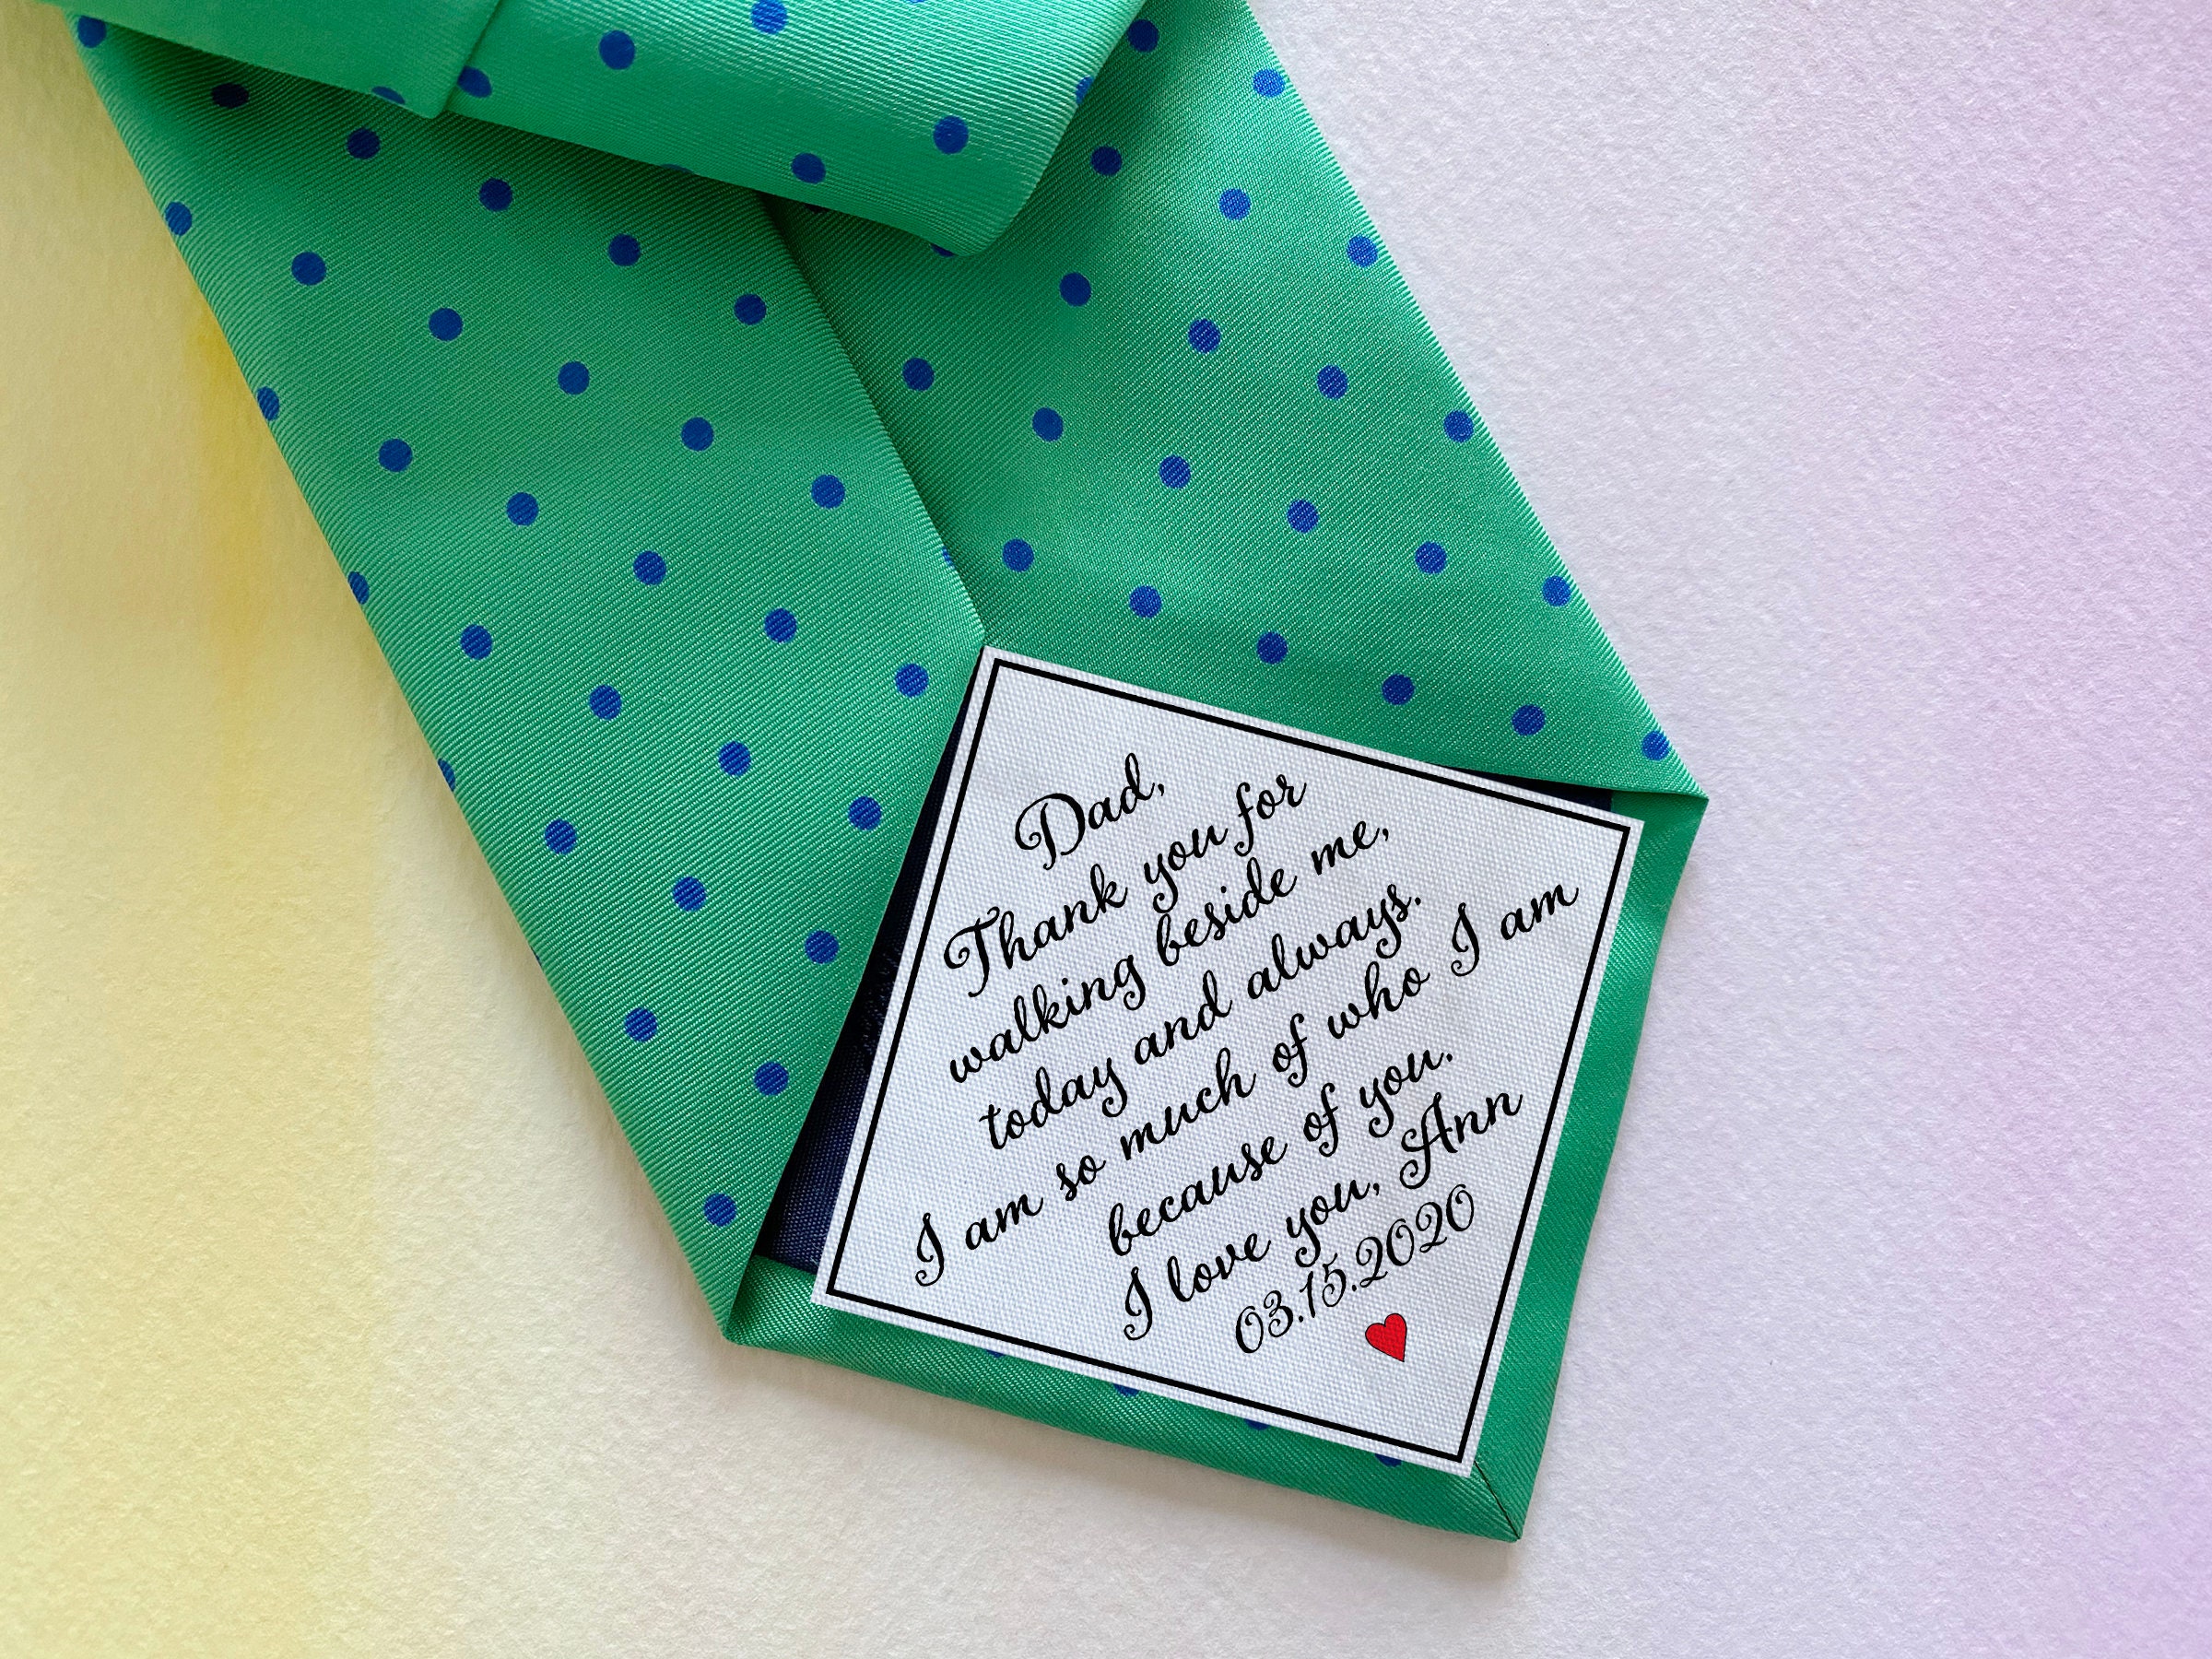 Dad Tie Patch / Tie Patch / Wedding Tie Patch / Father of the - Etsy